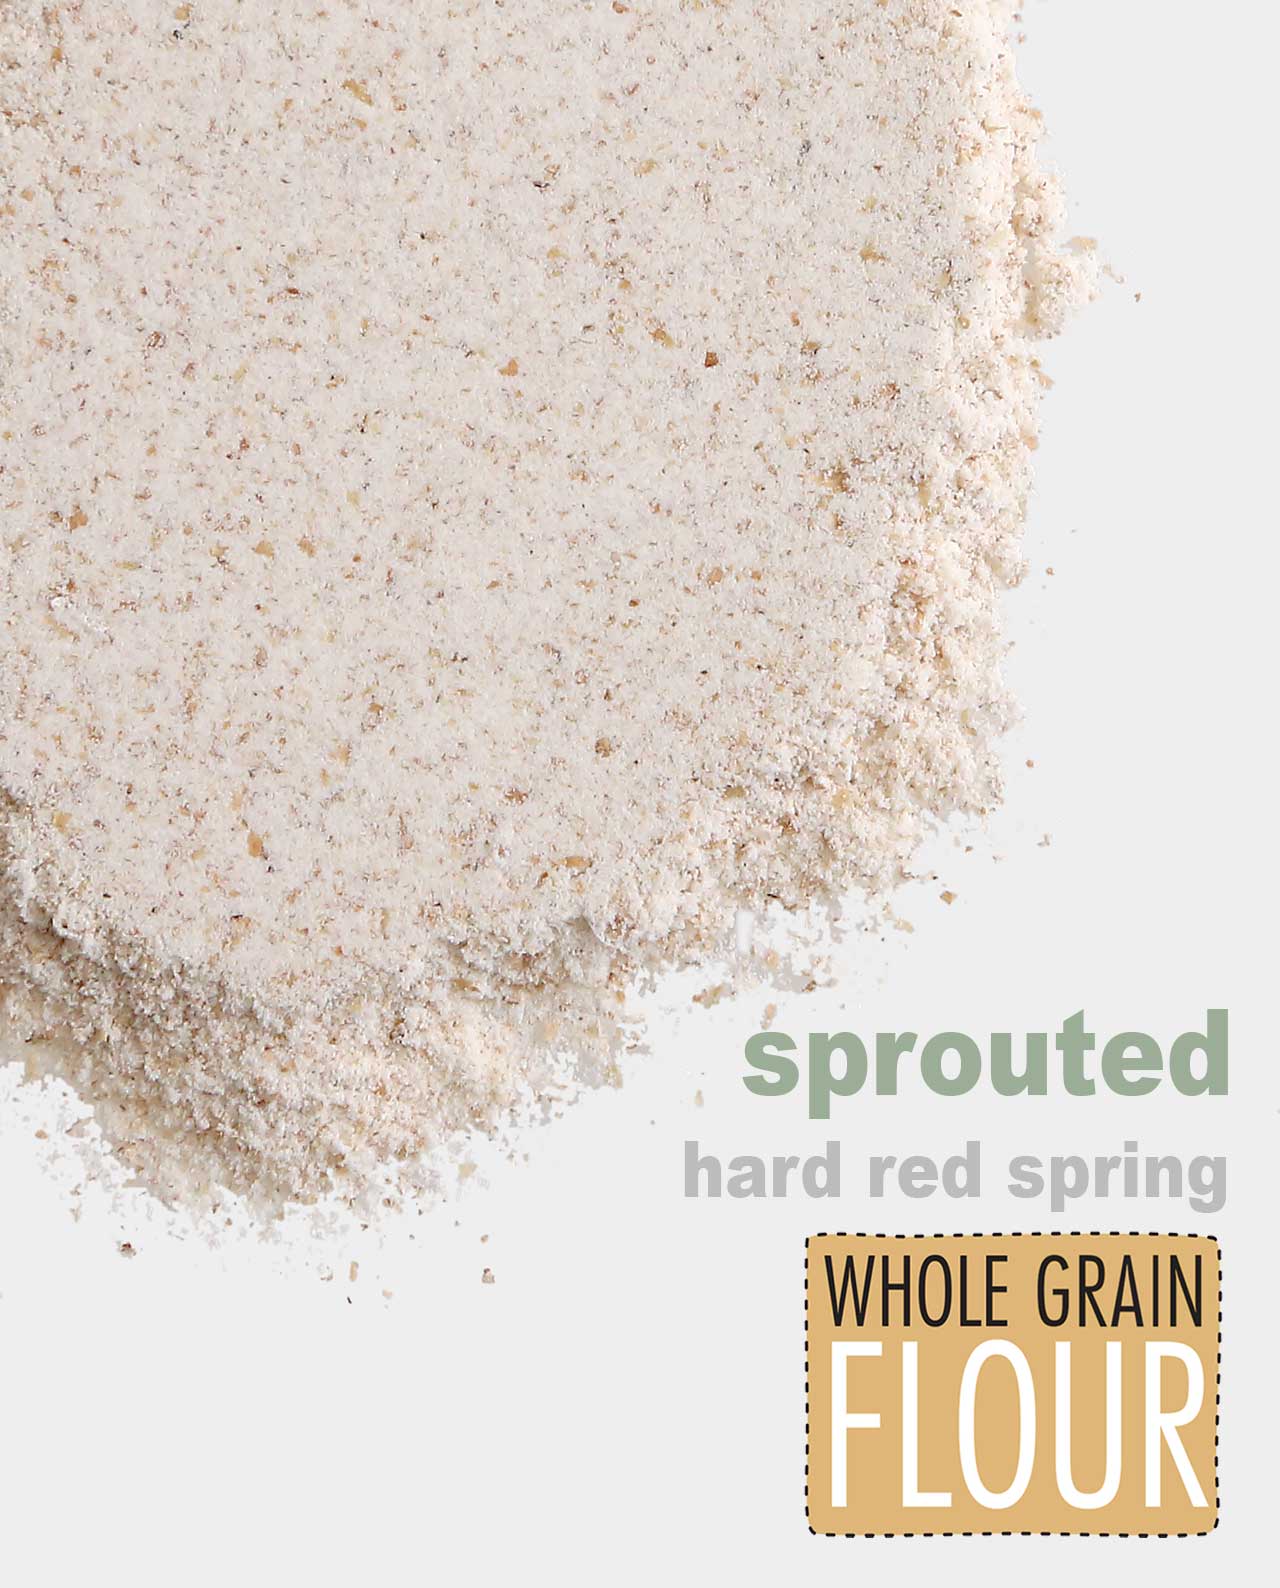 Sprouted Hard Red Spring Whole Grain Flour